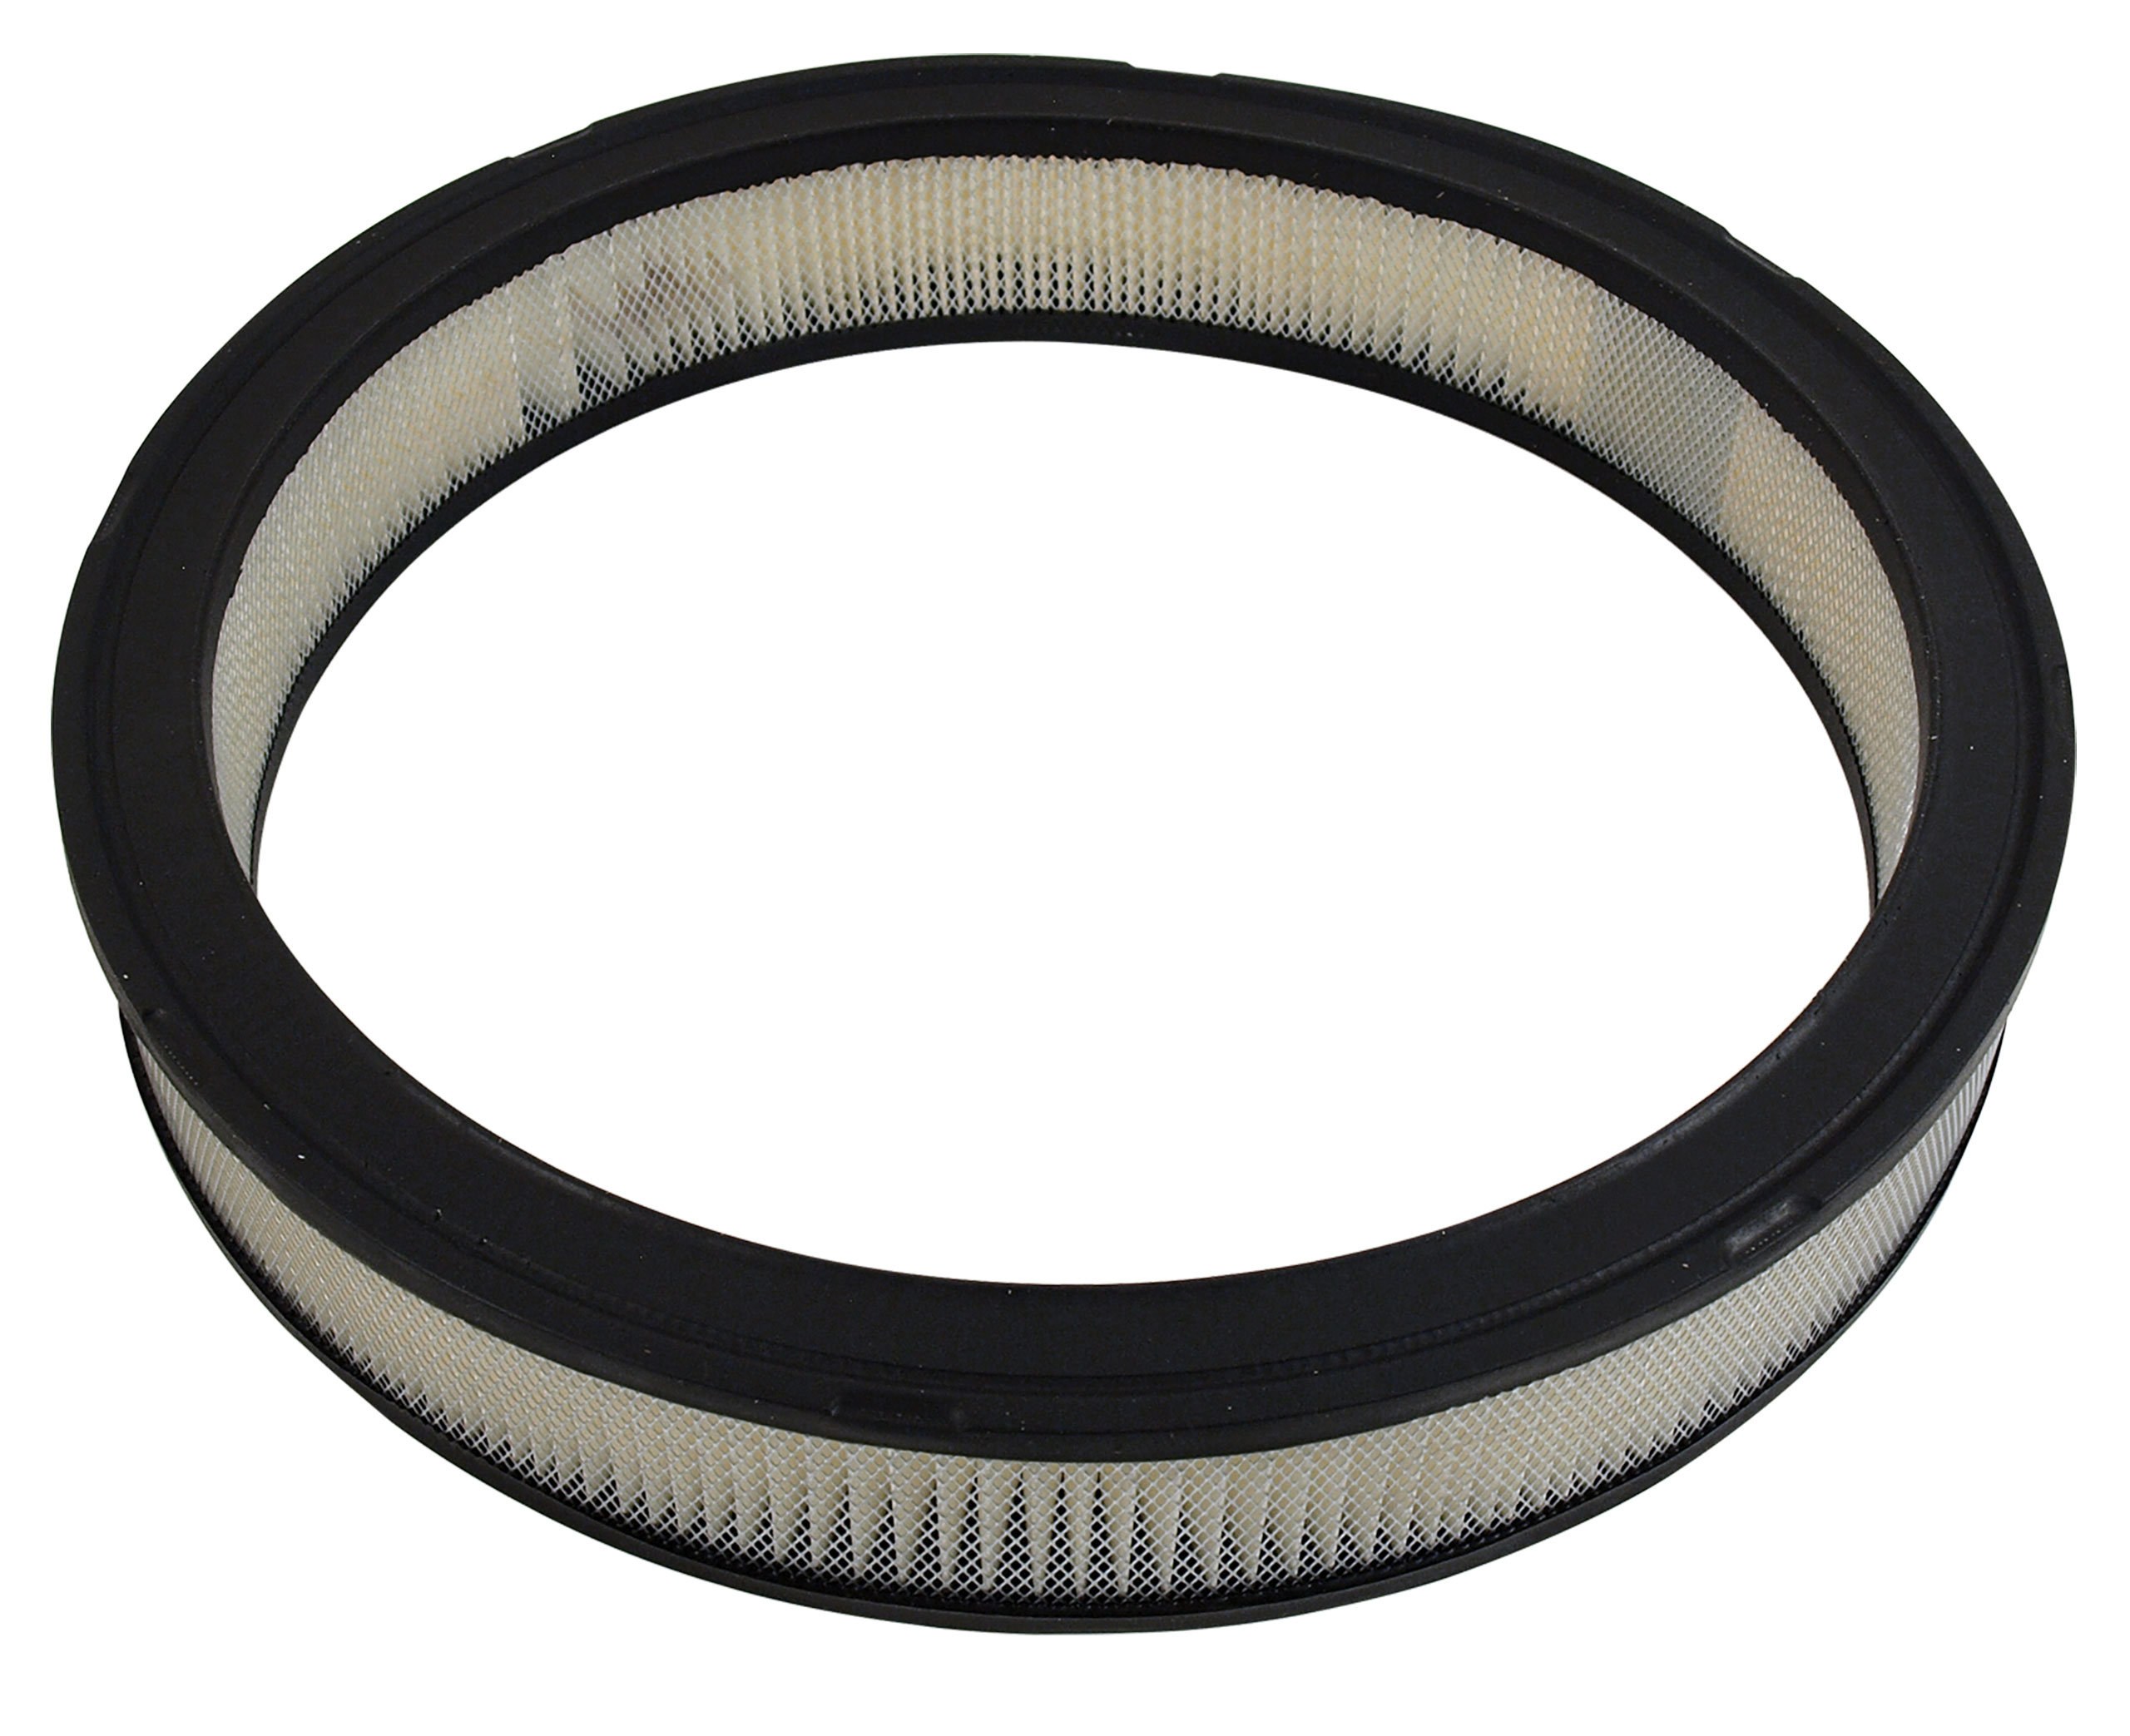 First Generation 1964-1972 Ford Mustang Air Cleaner Element - 289 HiPo, 302, 351, 390, 427, 428, 429ci - Wix Filters